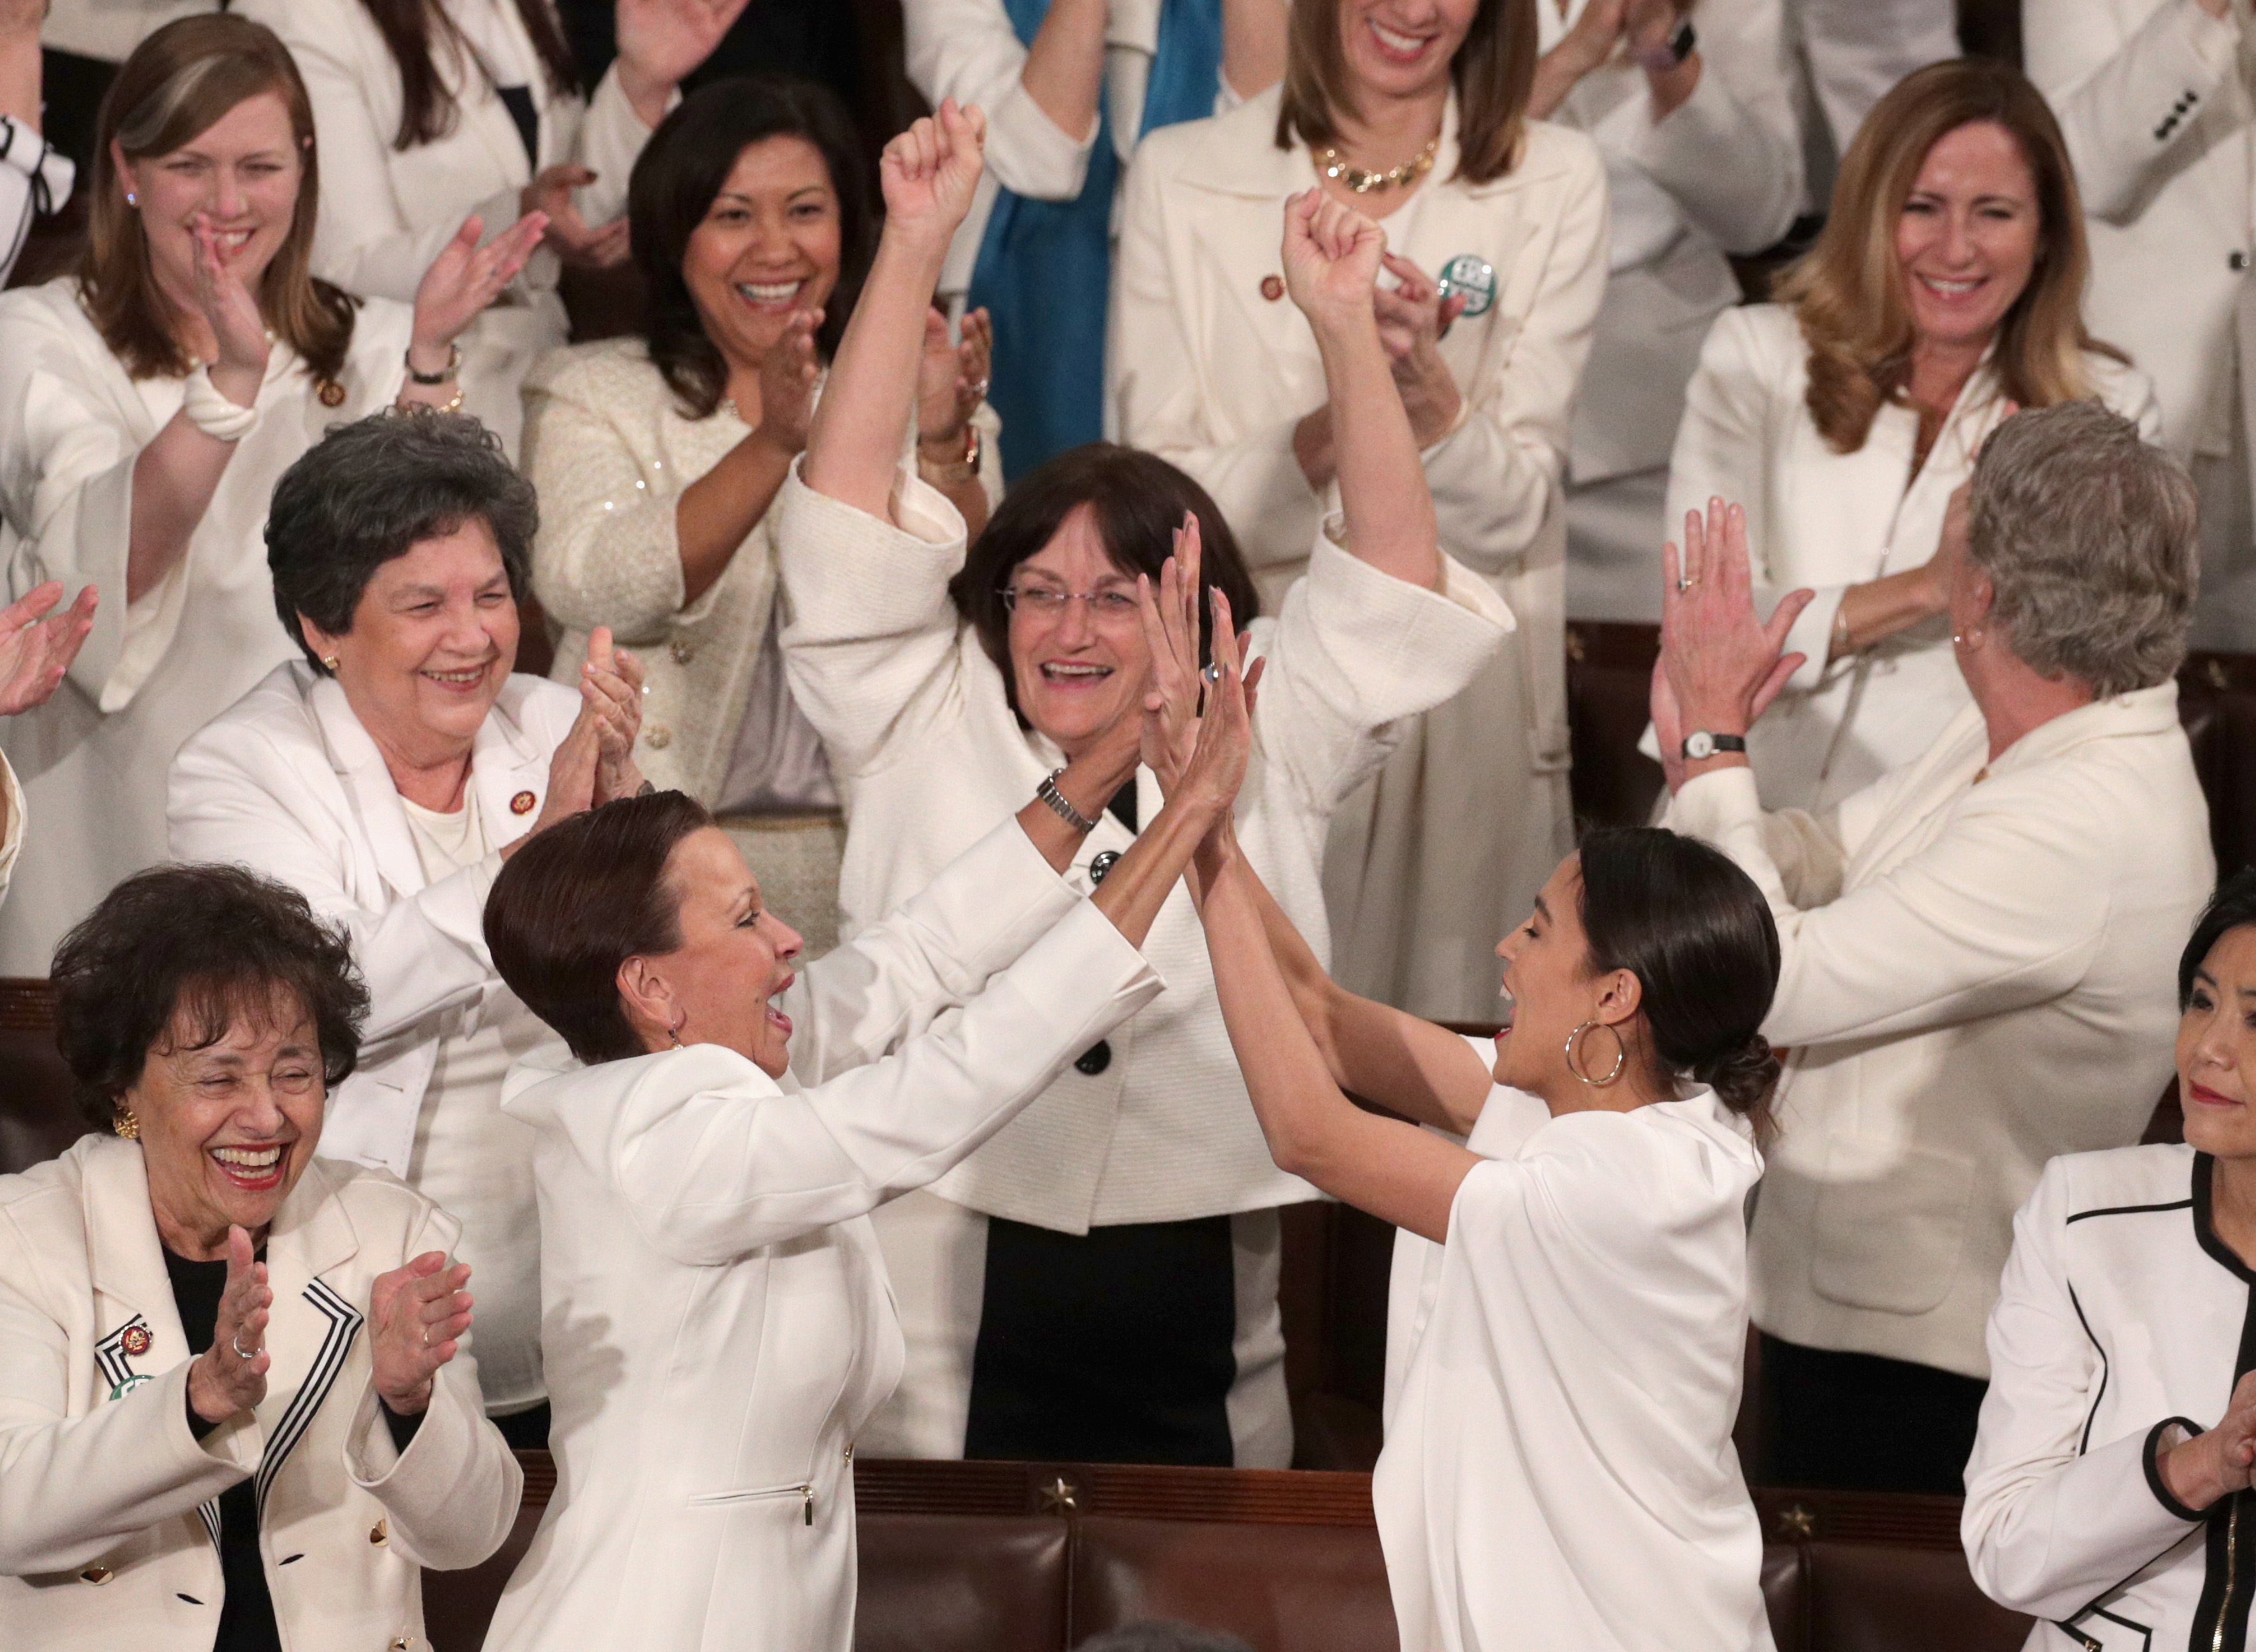 Rep. Alexandria Ocasio-Cortez (D-NY) and other female lawmakers cheer during President Donald Trump's State of the Union address in the chamber of the U.S. House of Representatives at the U.S. Capitol Building on February 5, 2019 in Washington, DC. A group of female Democratic lawmakers chose to wear white to the speech in solidarity with women and a nod to the suffragette movement. (Alex Wong—Getty Images)